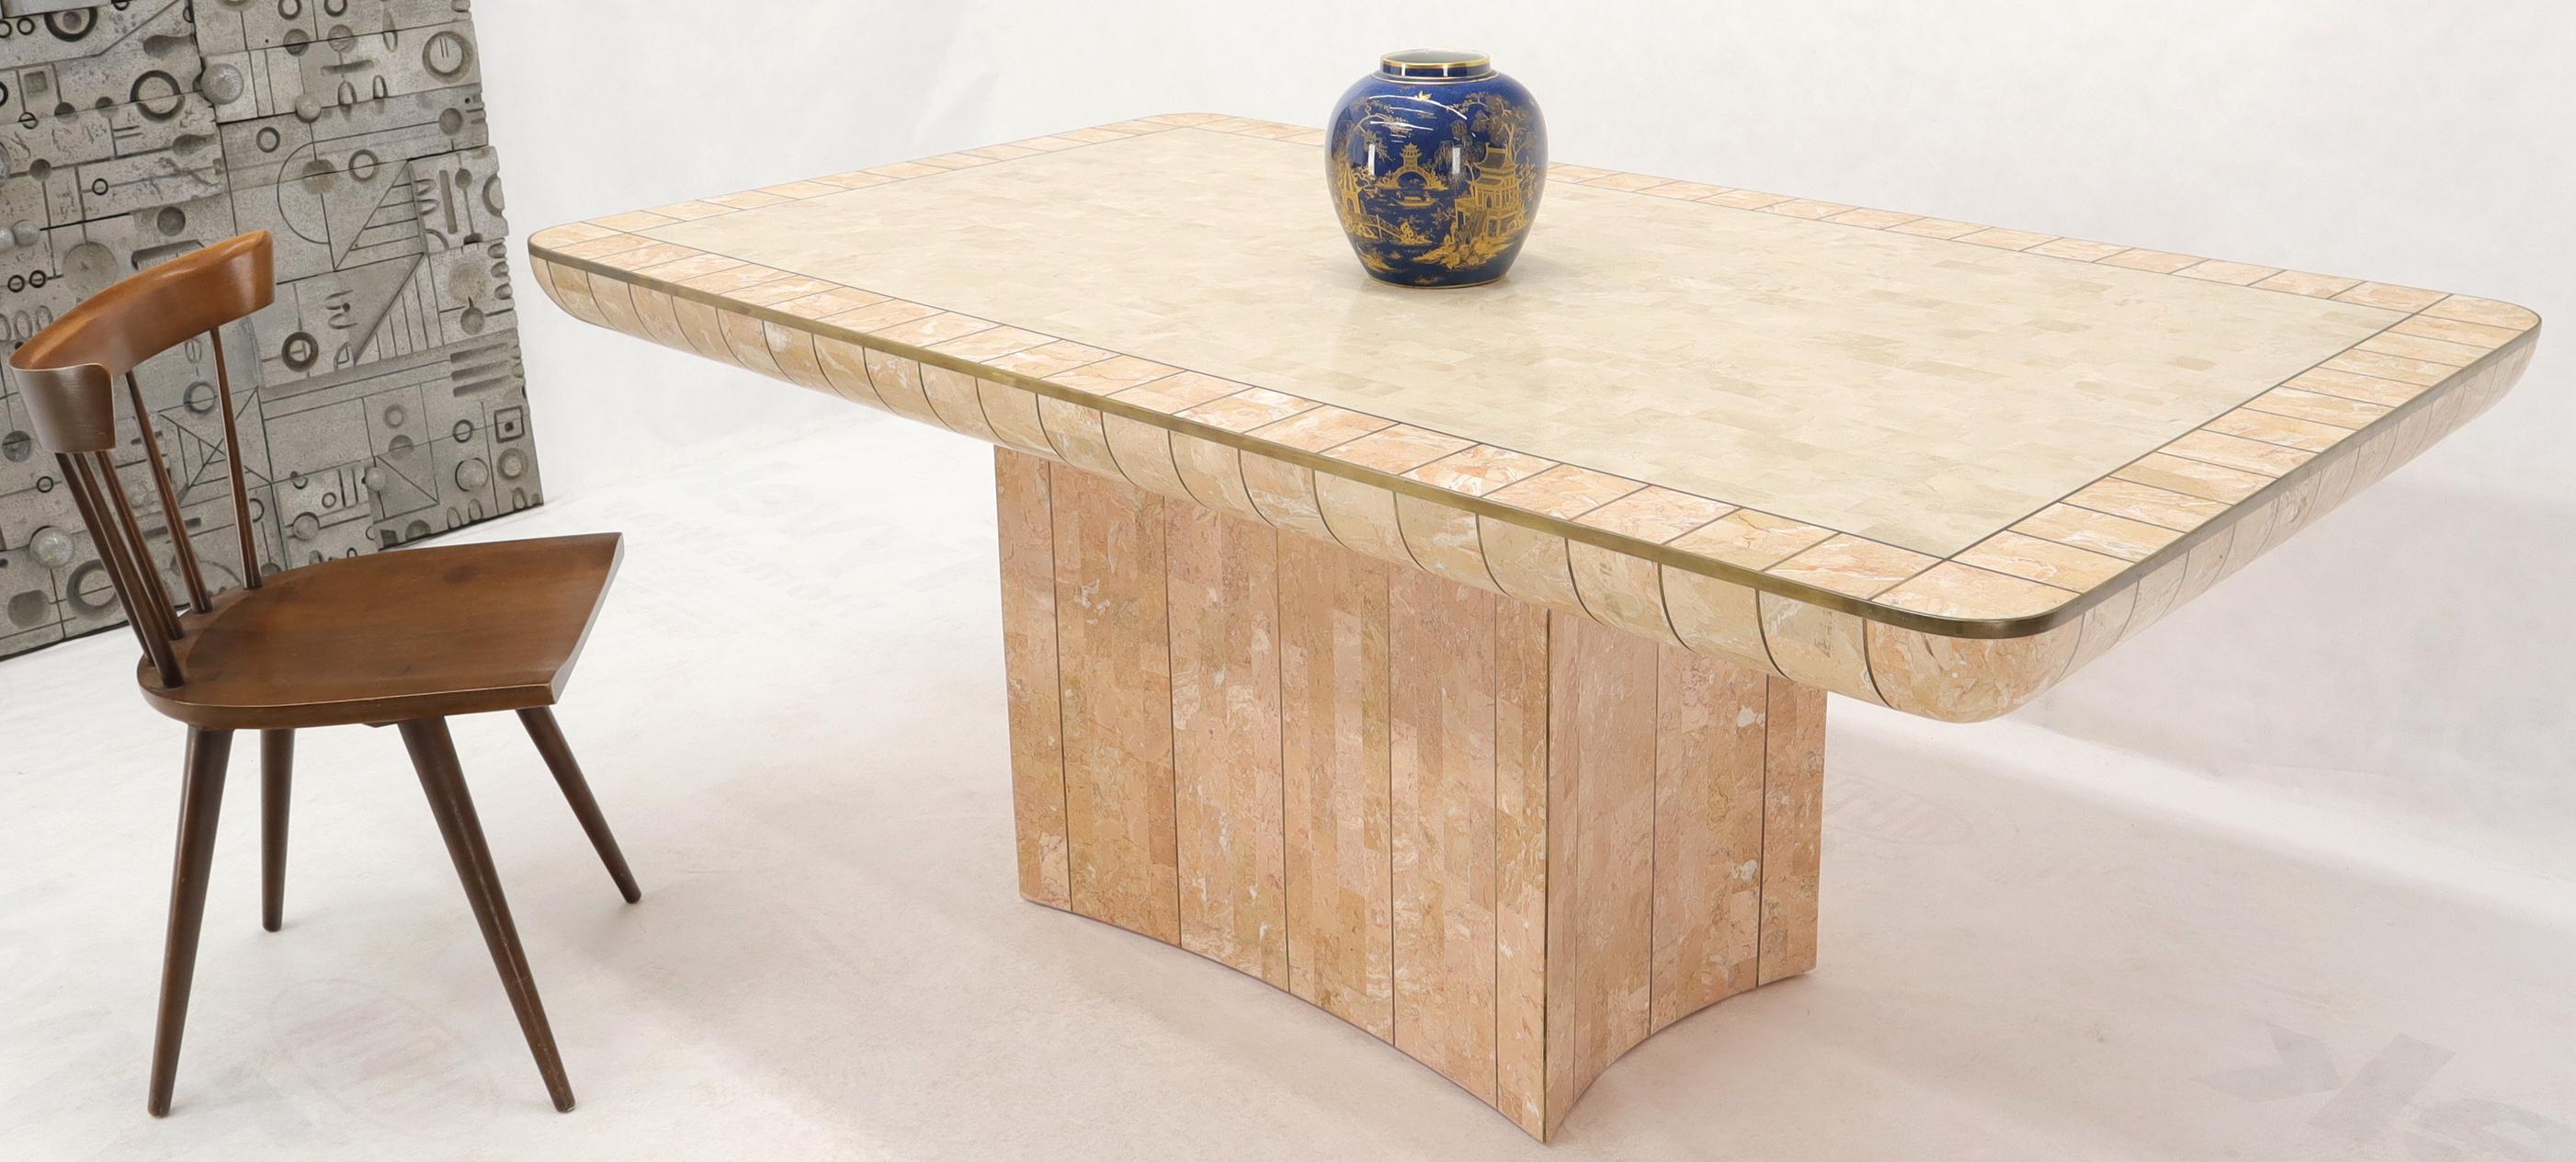 Mid-Century Modern concave pedestal base tessellated stone dining or conference table. Thick curved edge decorated with multiple brass inlay ribs top. Beige and pale rouge stone colors combination. Attributed to Enrique Garcel and Maitland Smith.